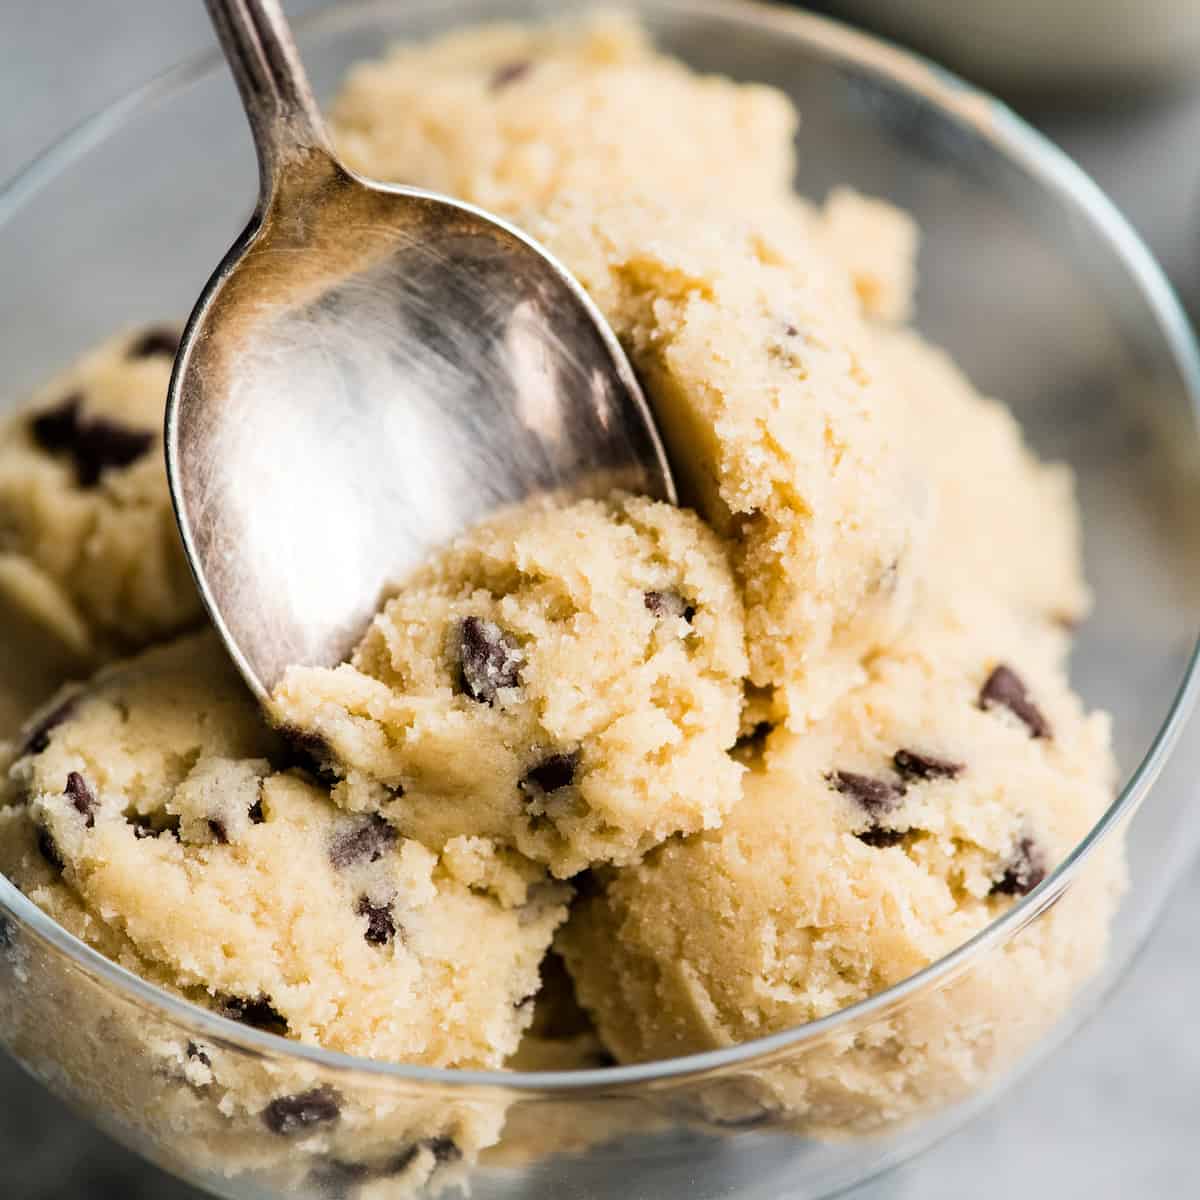 overhead view of a spoon taking a scoop of Edible Cookie Dough out of a glass dish